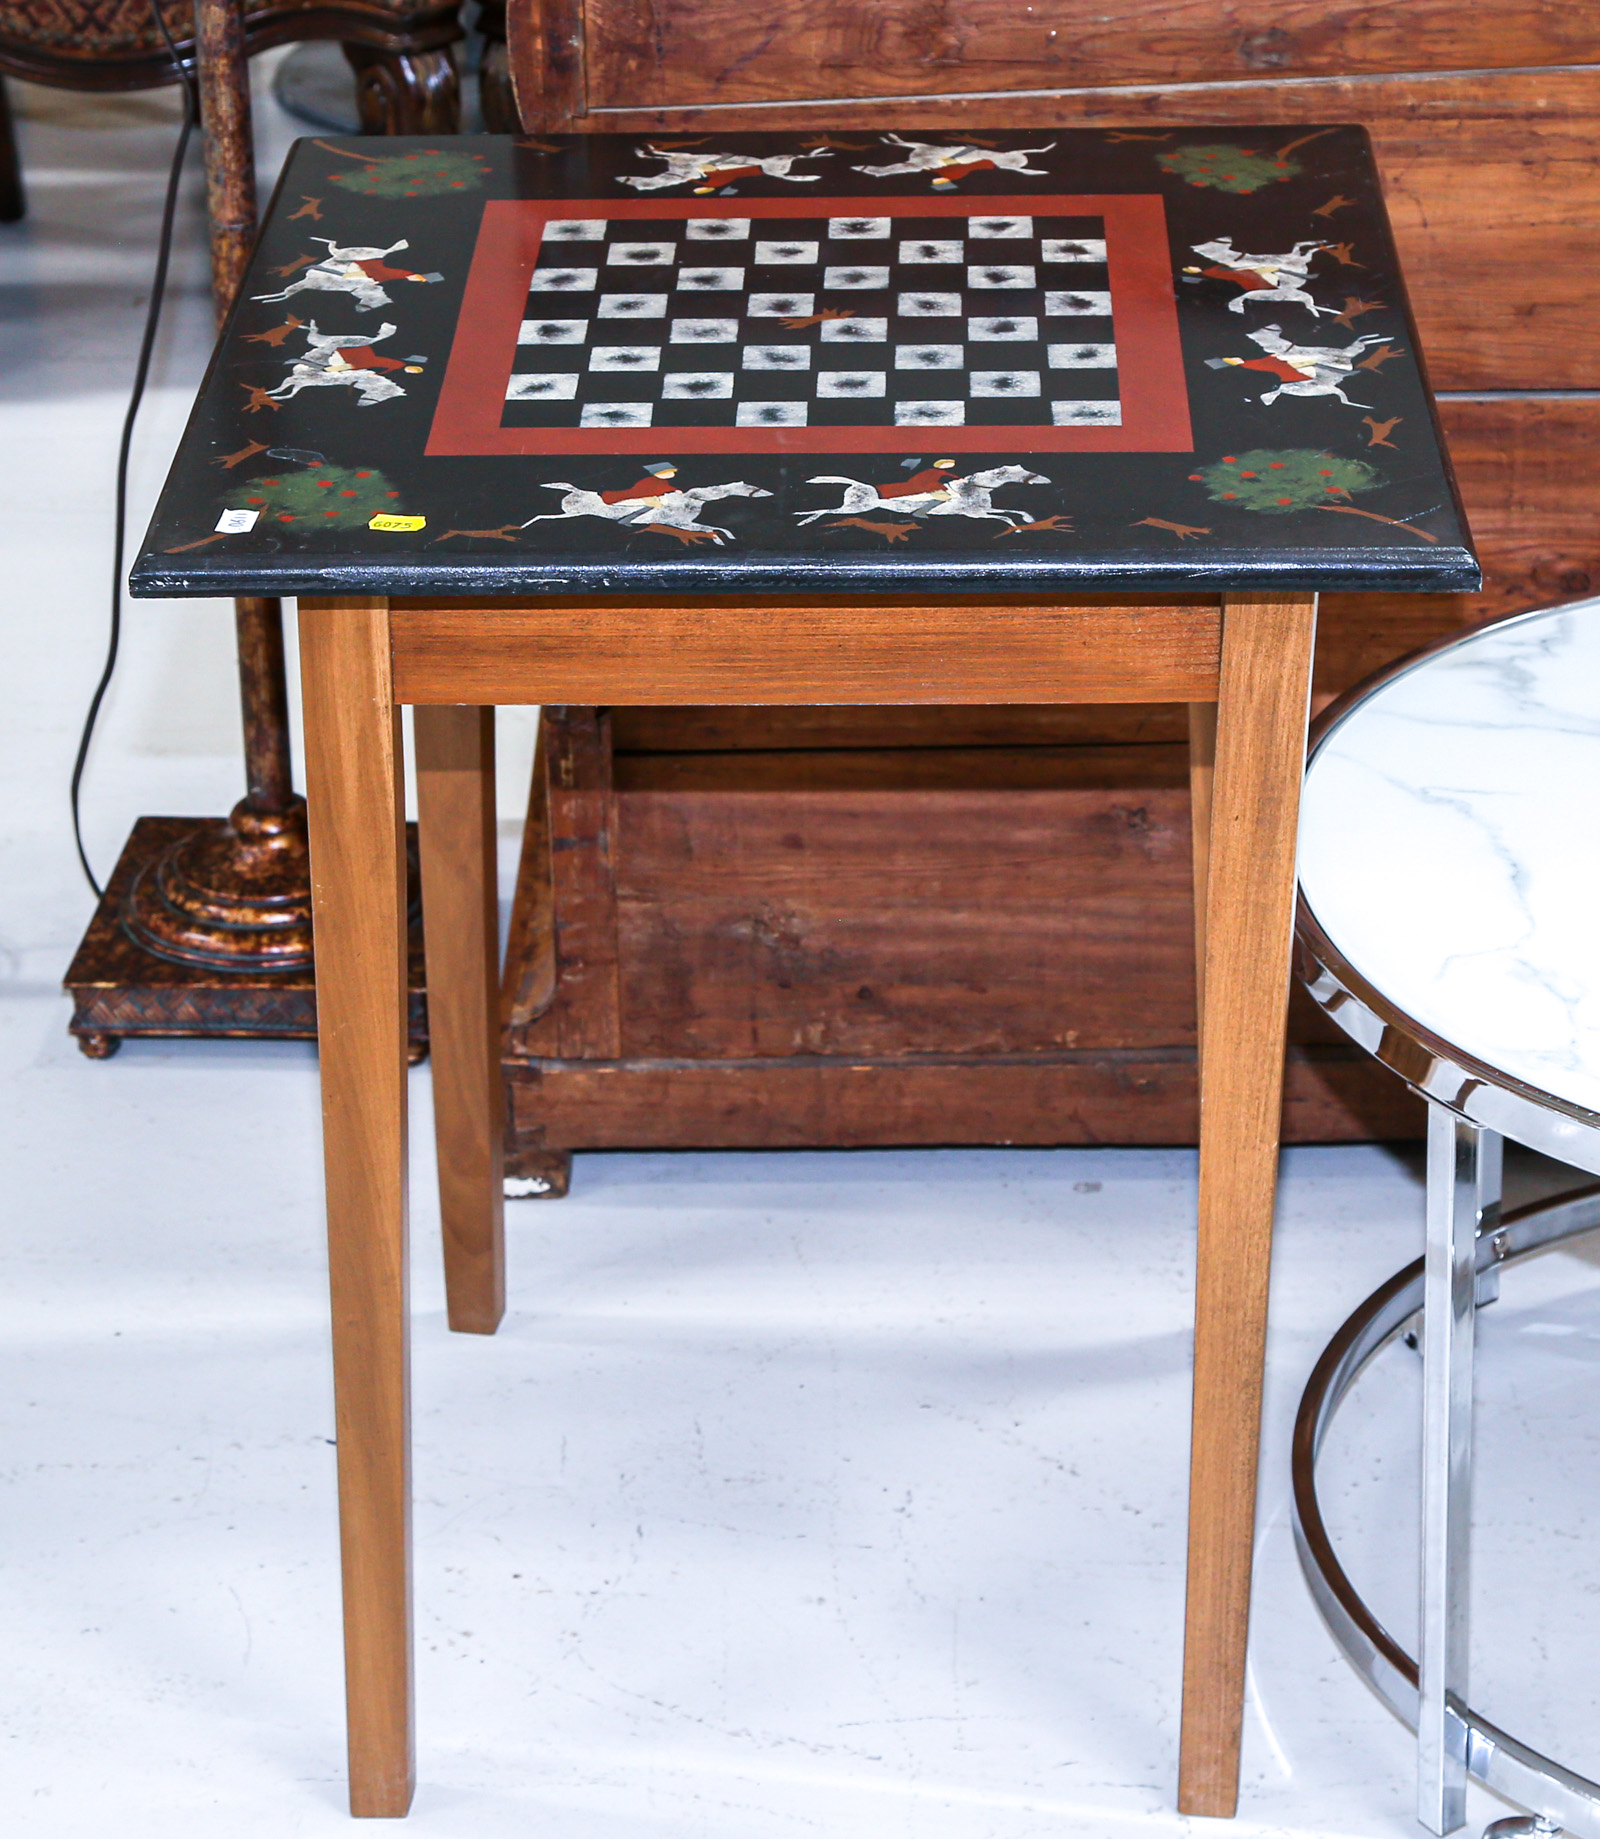 FOX HOUNDS DECORATED CHESS TABLE 2e9227